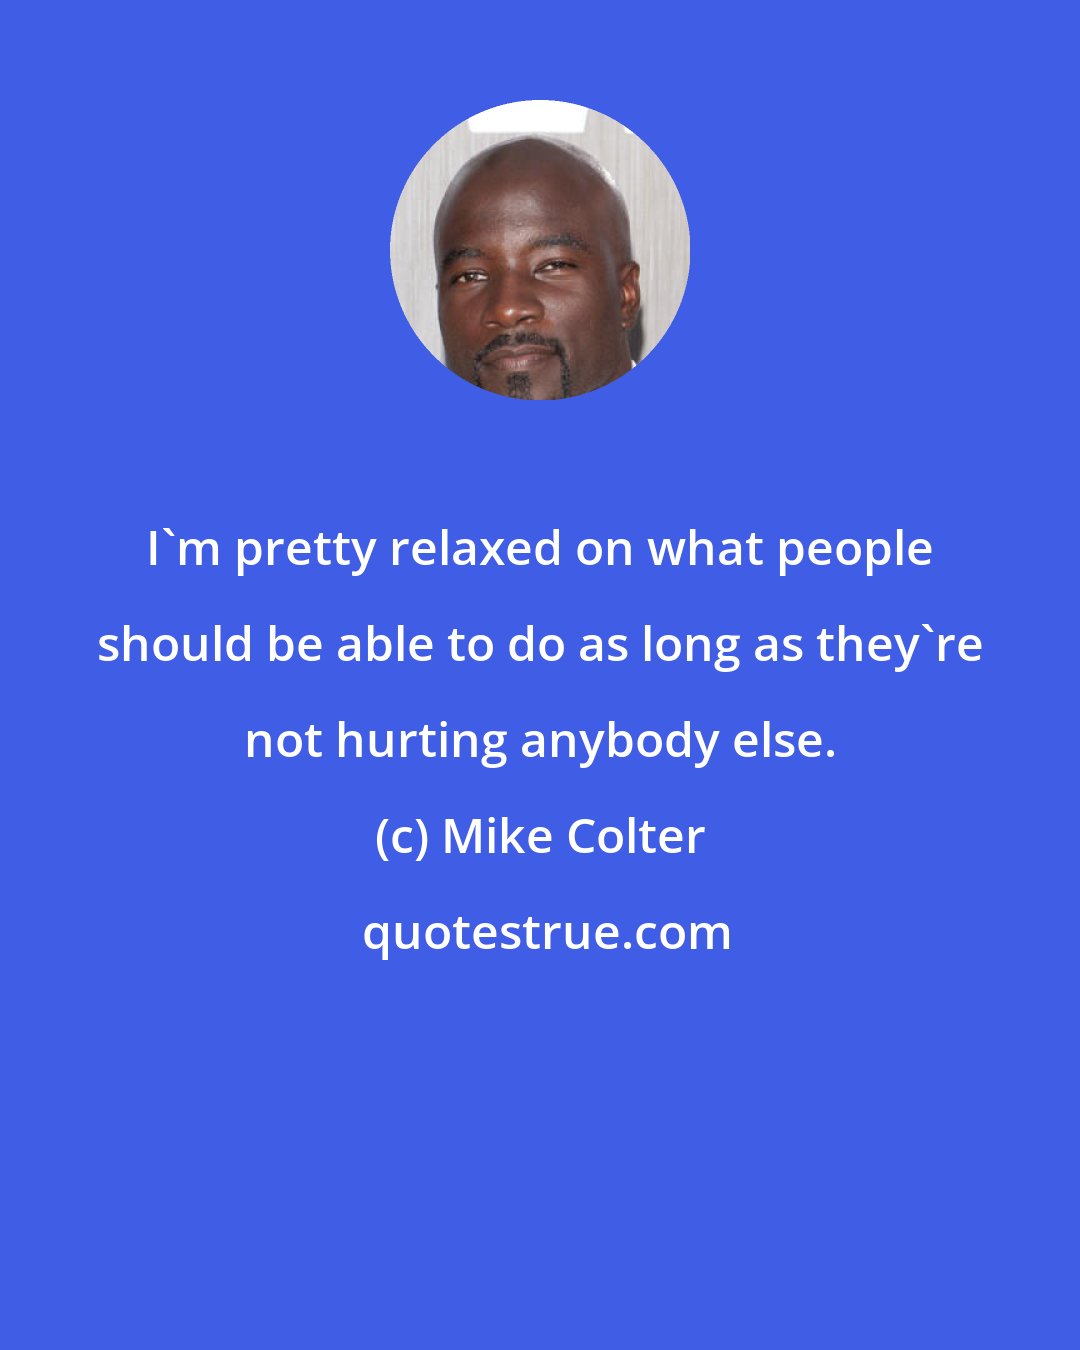 Mike Colter: I'm pretty relaxed on what people should be able to do as long as they're not hurting anybody else.